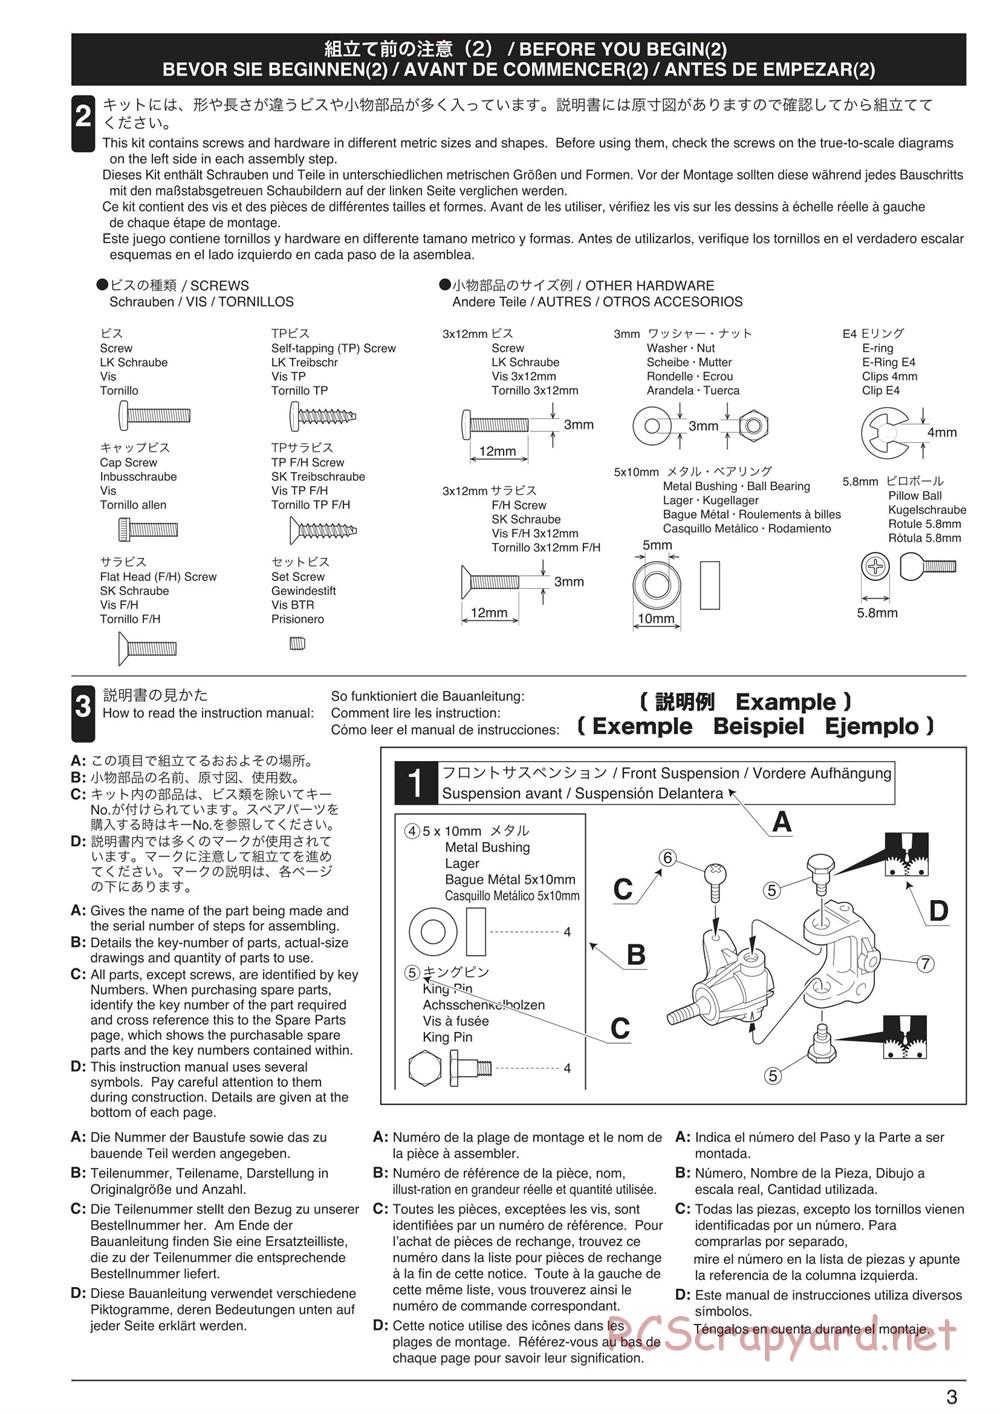 Kyosho - Inferno Neo ST 3.0 - Manual - Page 3